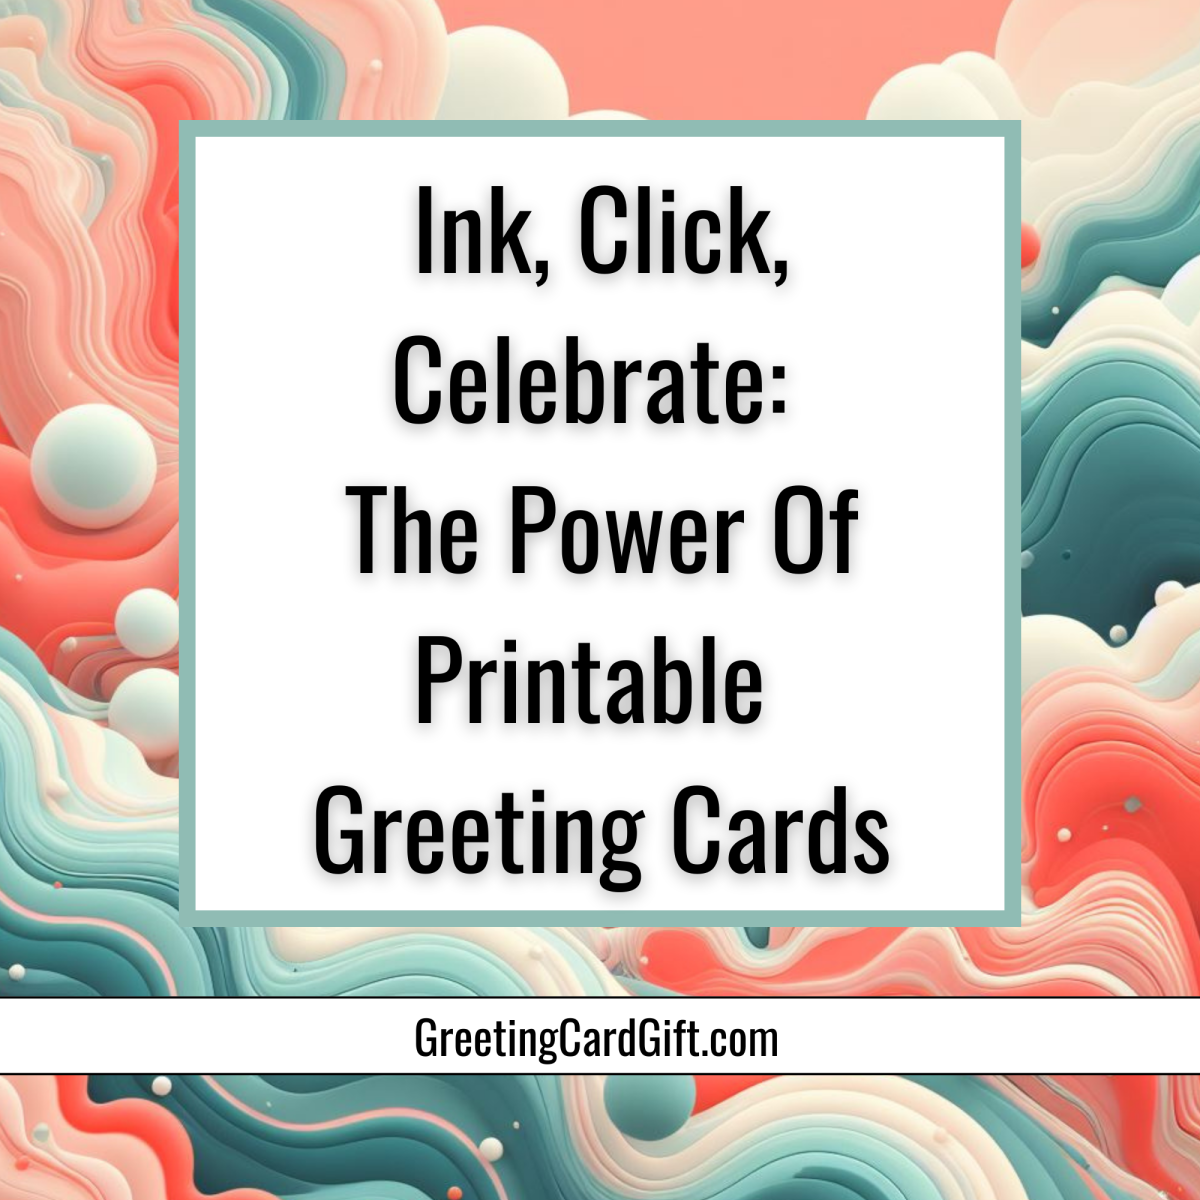 Ink, Click, Celebrate: The Power Of Printable Greeting Cards